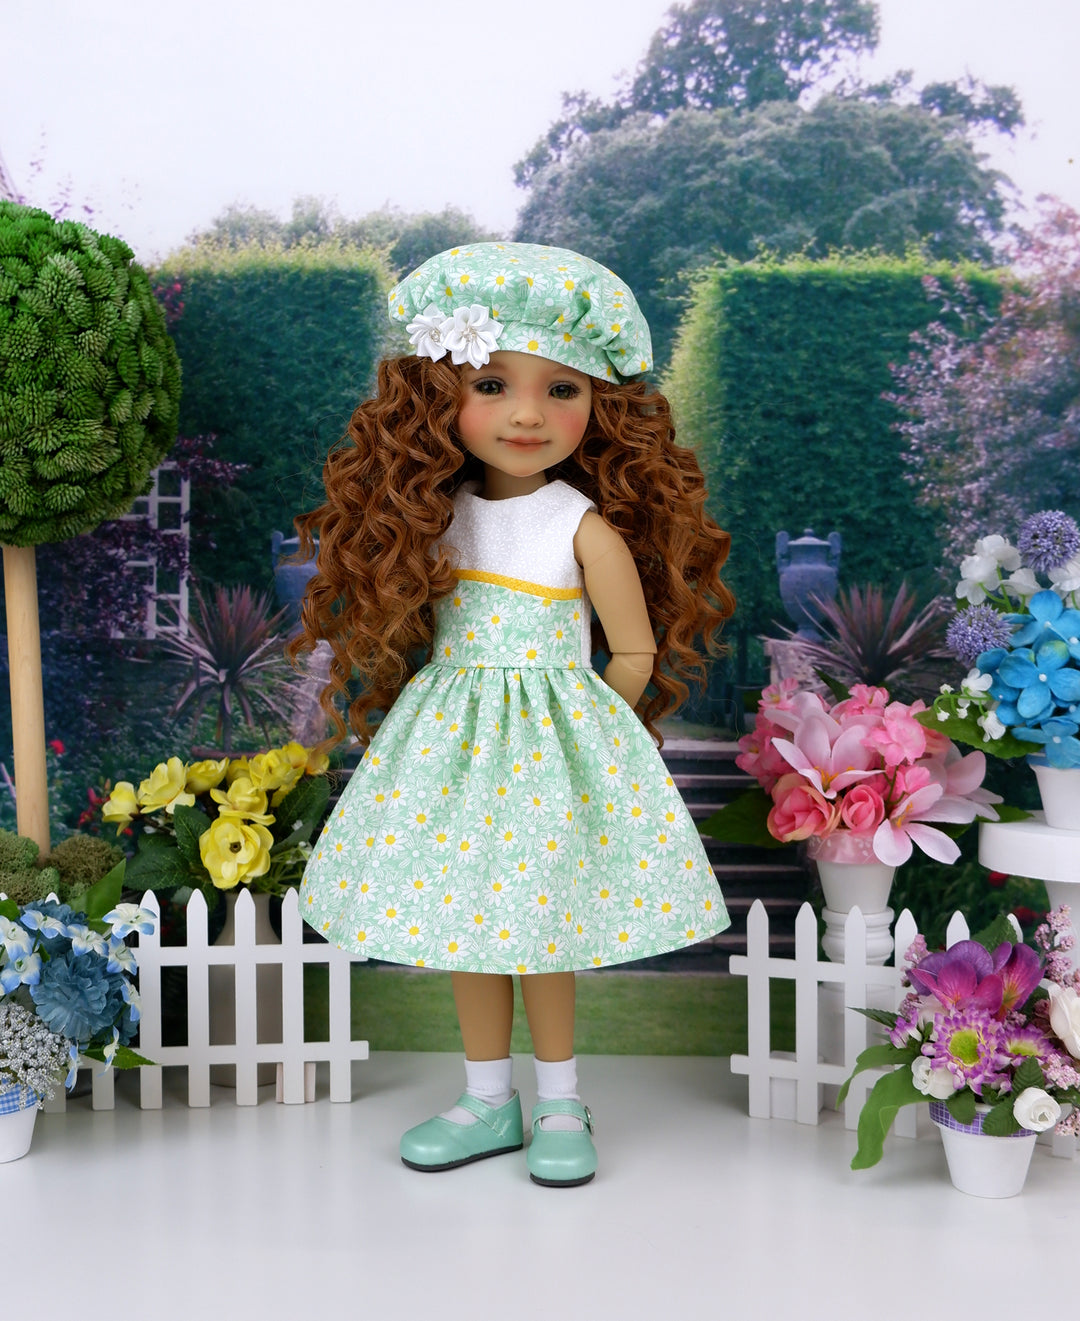 Spring Daisy - dress and shoes for Ruby Red Fashion Friends doll